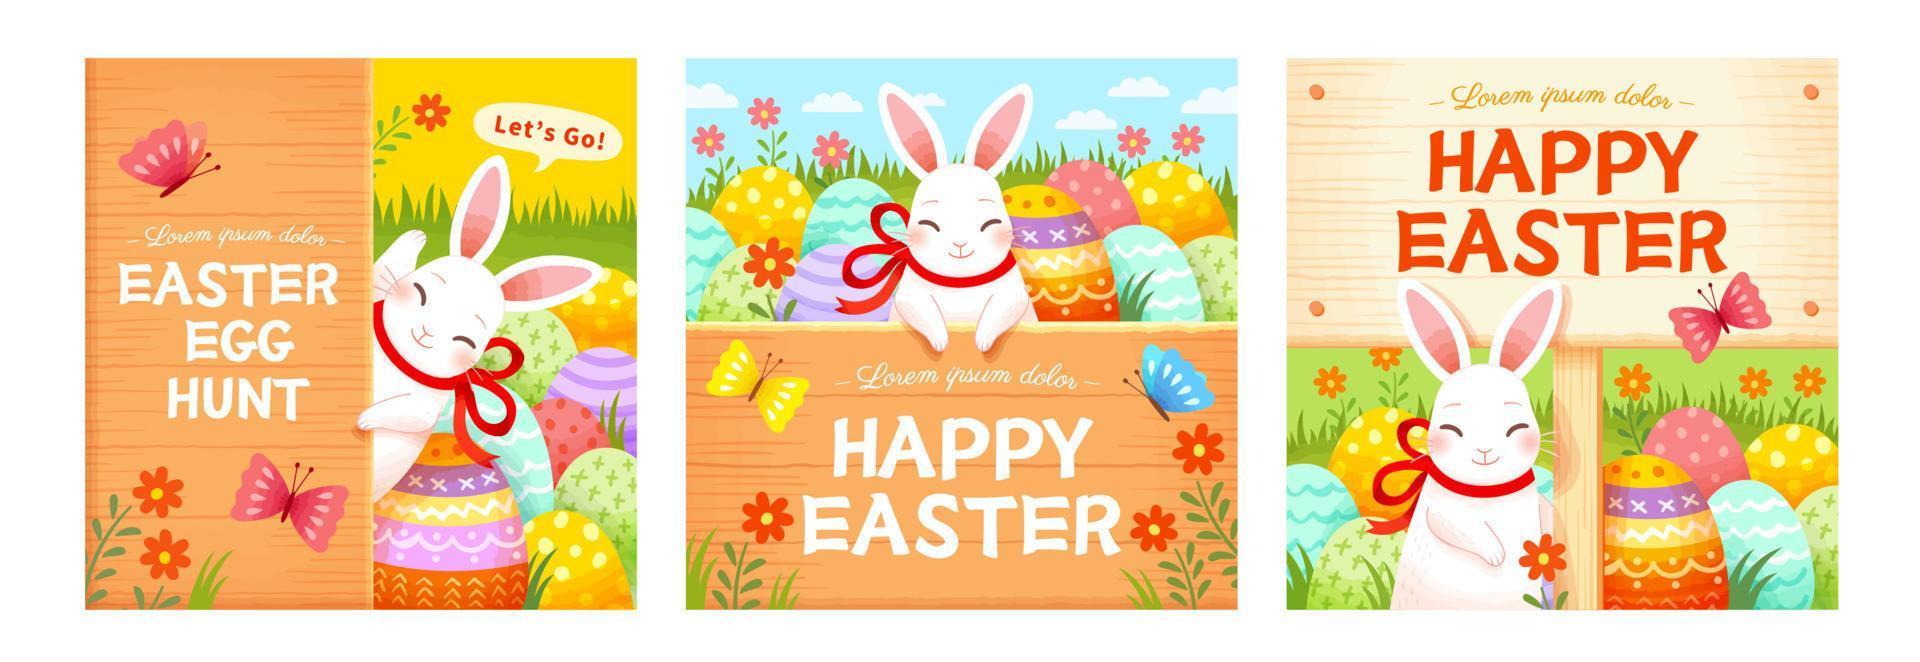 Easter templates with cute rabbits, eggs and wood boards. Holiday background suitable for event invitation or greeting card. vector